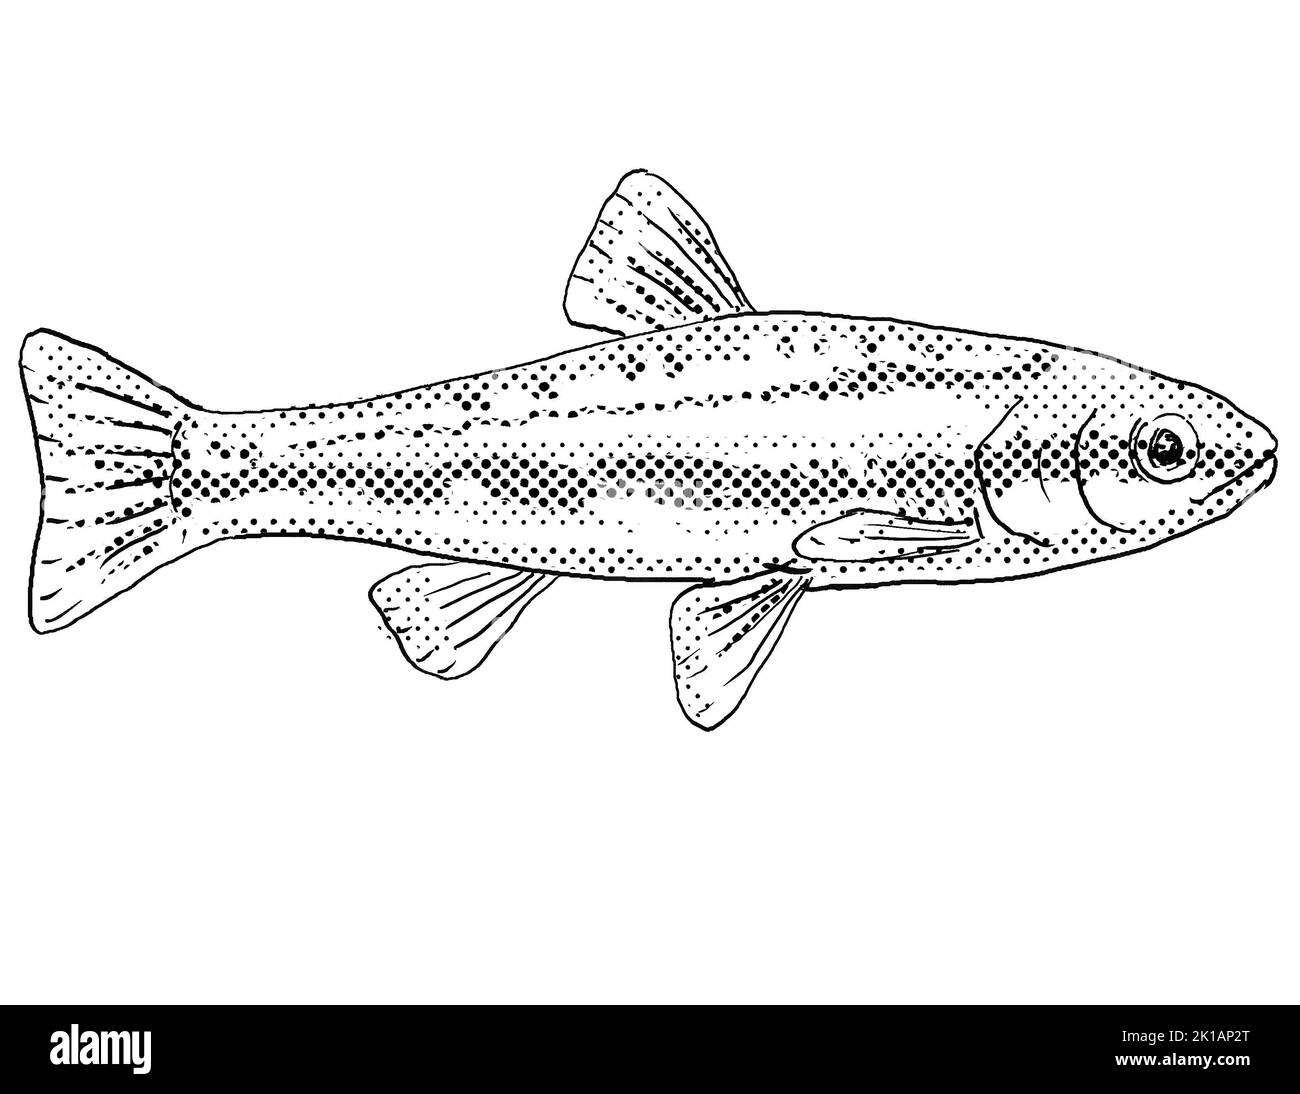 Cartoon style line drawing of a Laurel dace or Chrosomus saylori, a freshwater fish endemic to North America with halftone dots shading on isolated ba Stock Photo